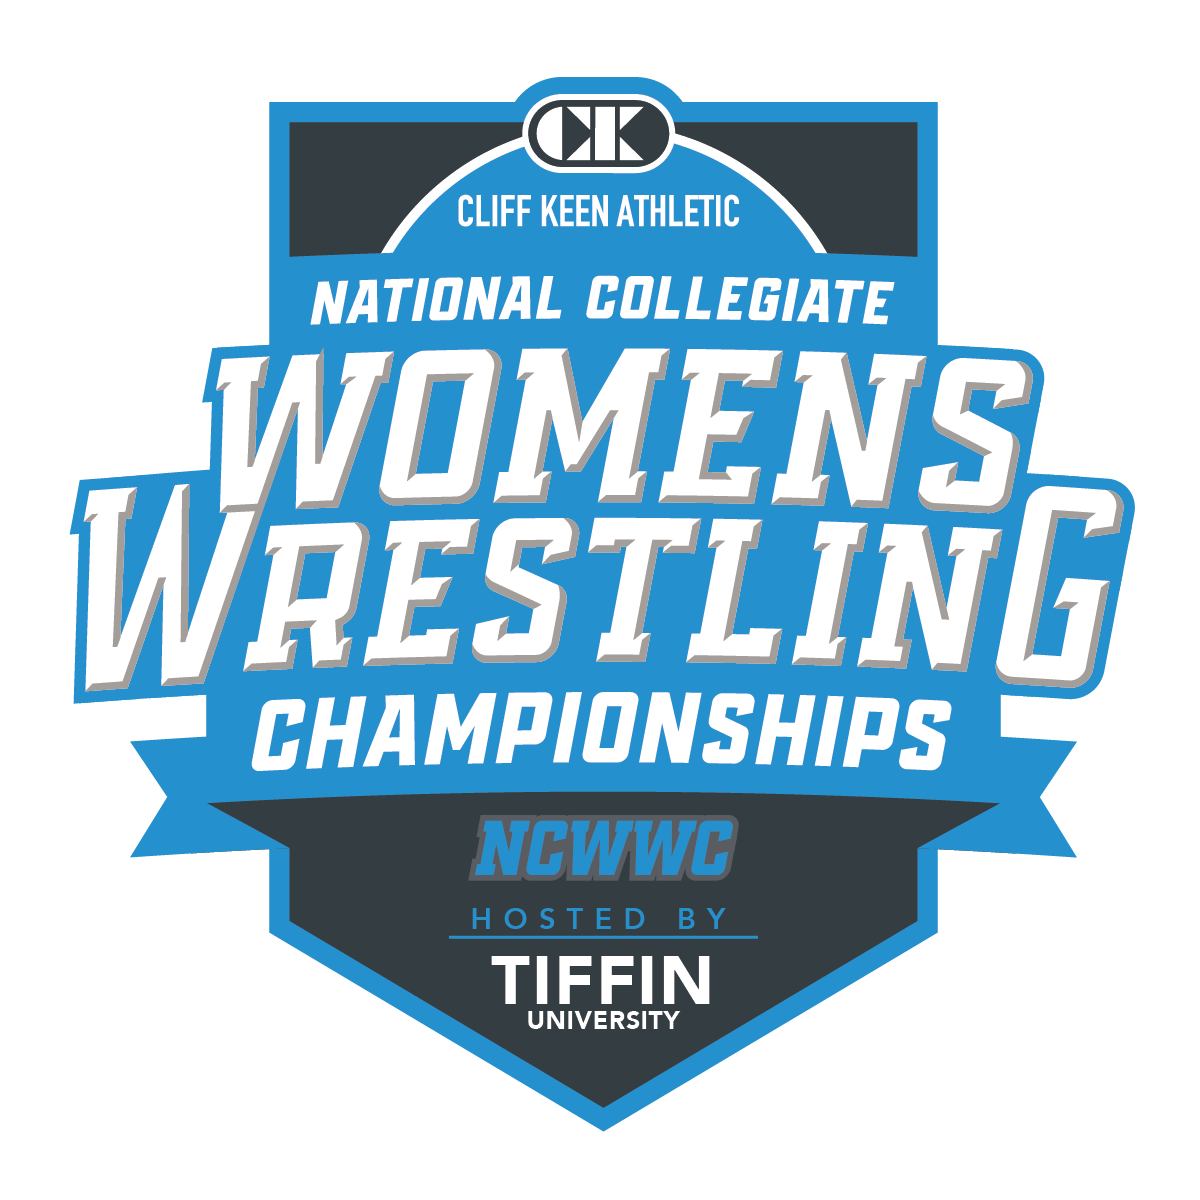 More information about "National Collegiate Women’s Wrestling Championships"